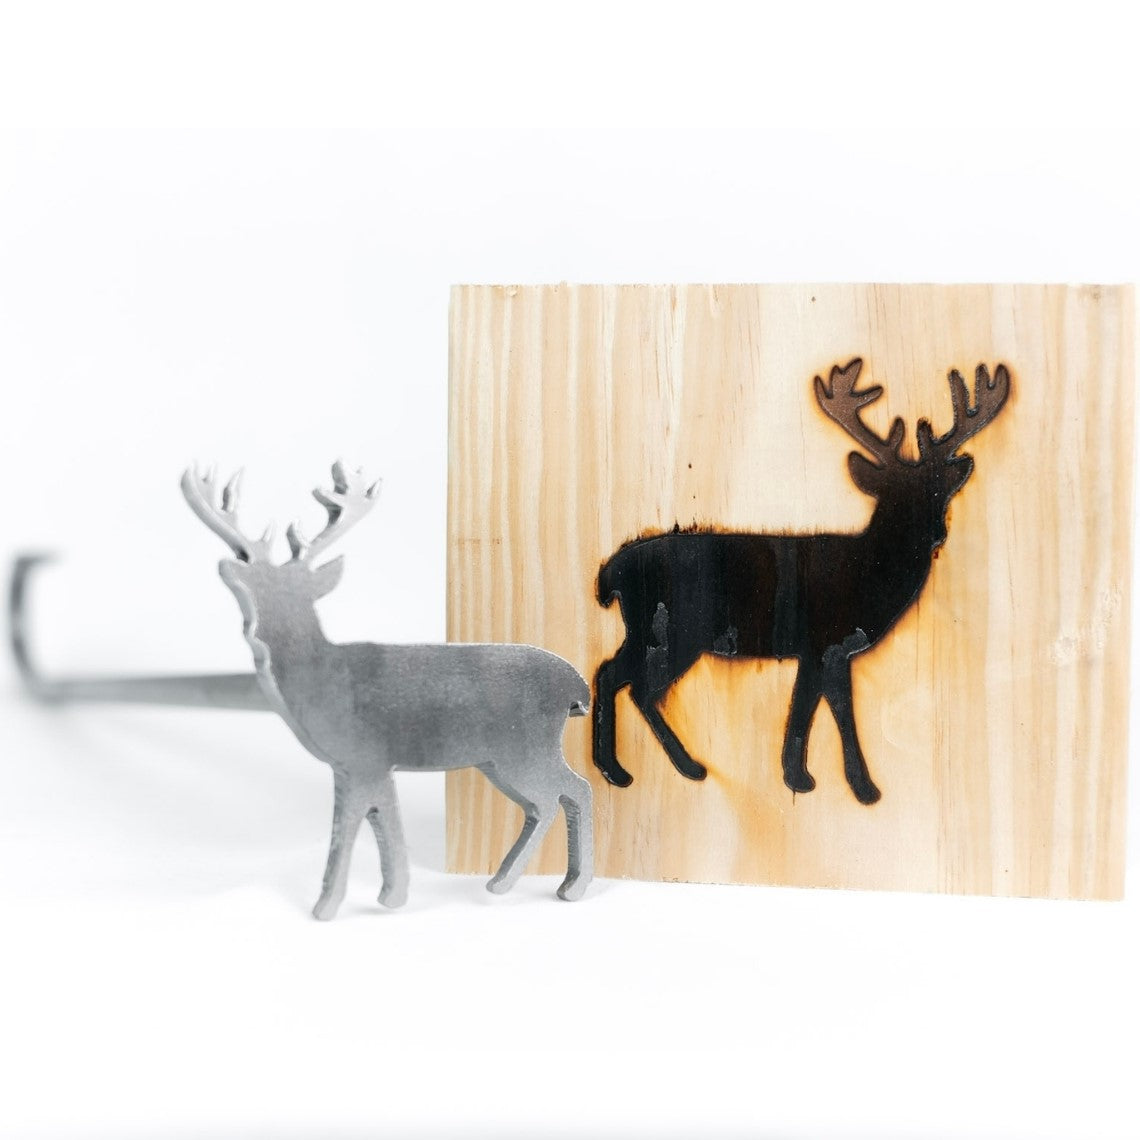 White Tail Deer Brand - 3.5" - BBQ, Crafts, Woodworking Projects - The Heritage Forge